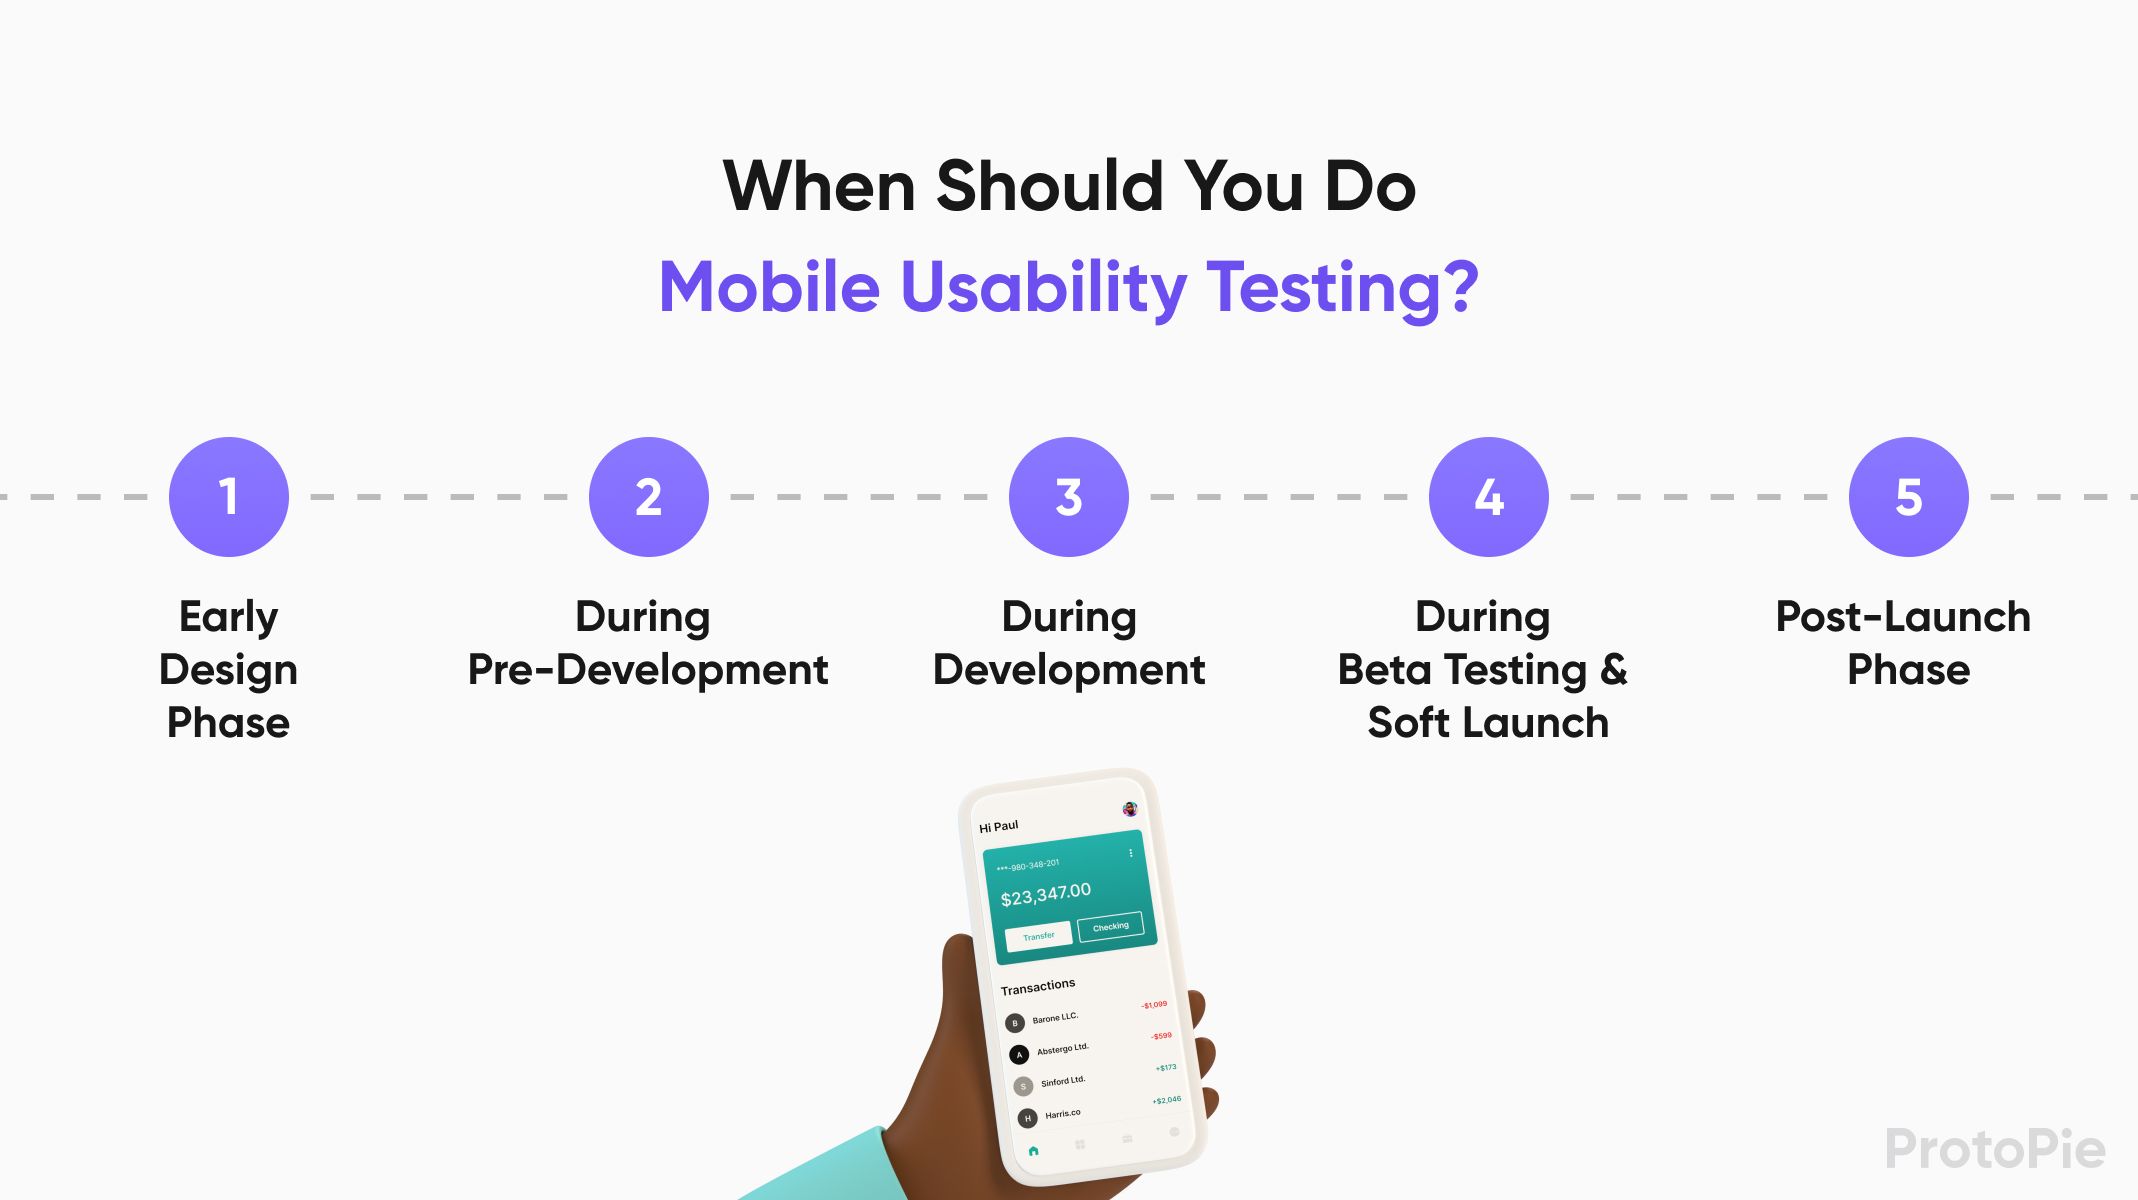 Different phases of mobile usability testing